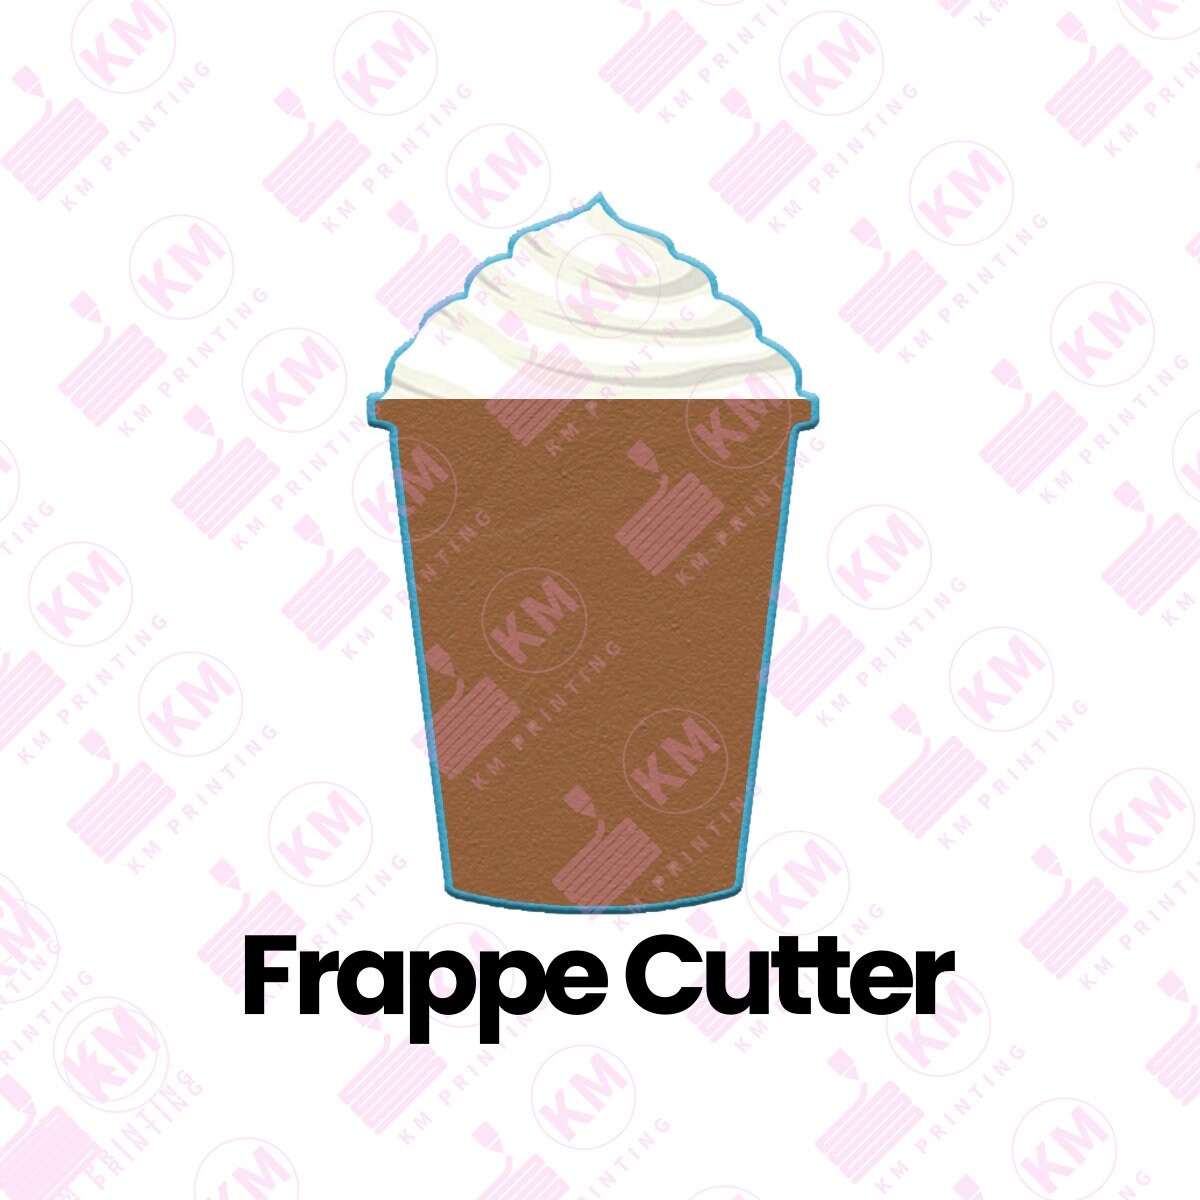 Frappe with Whipped Cream Fondant Cookie Cutter